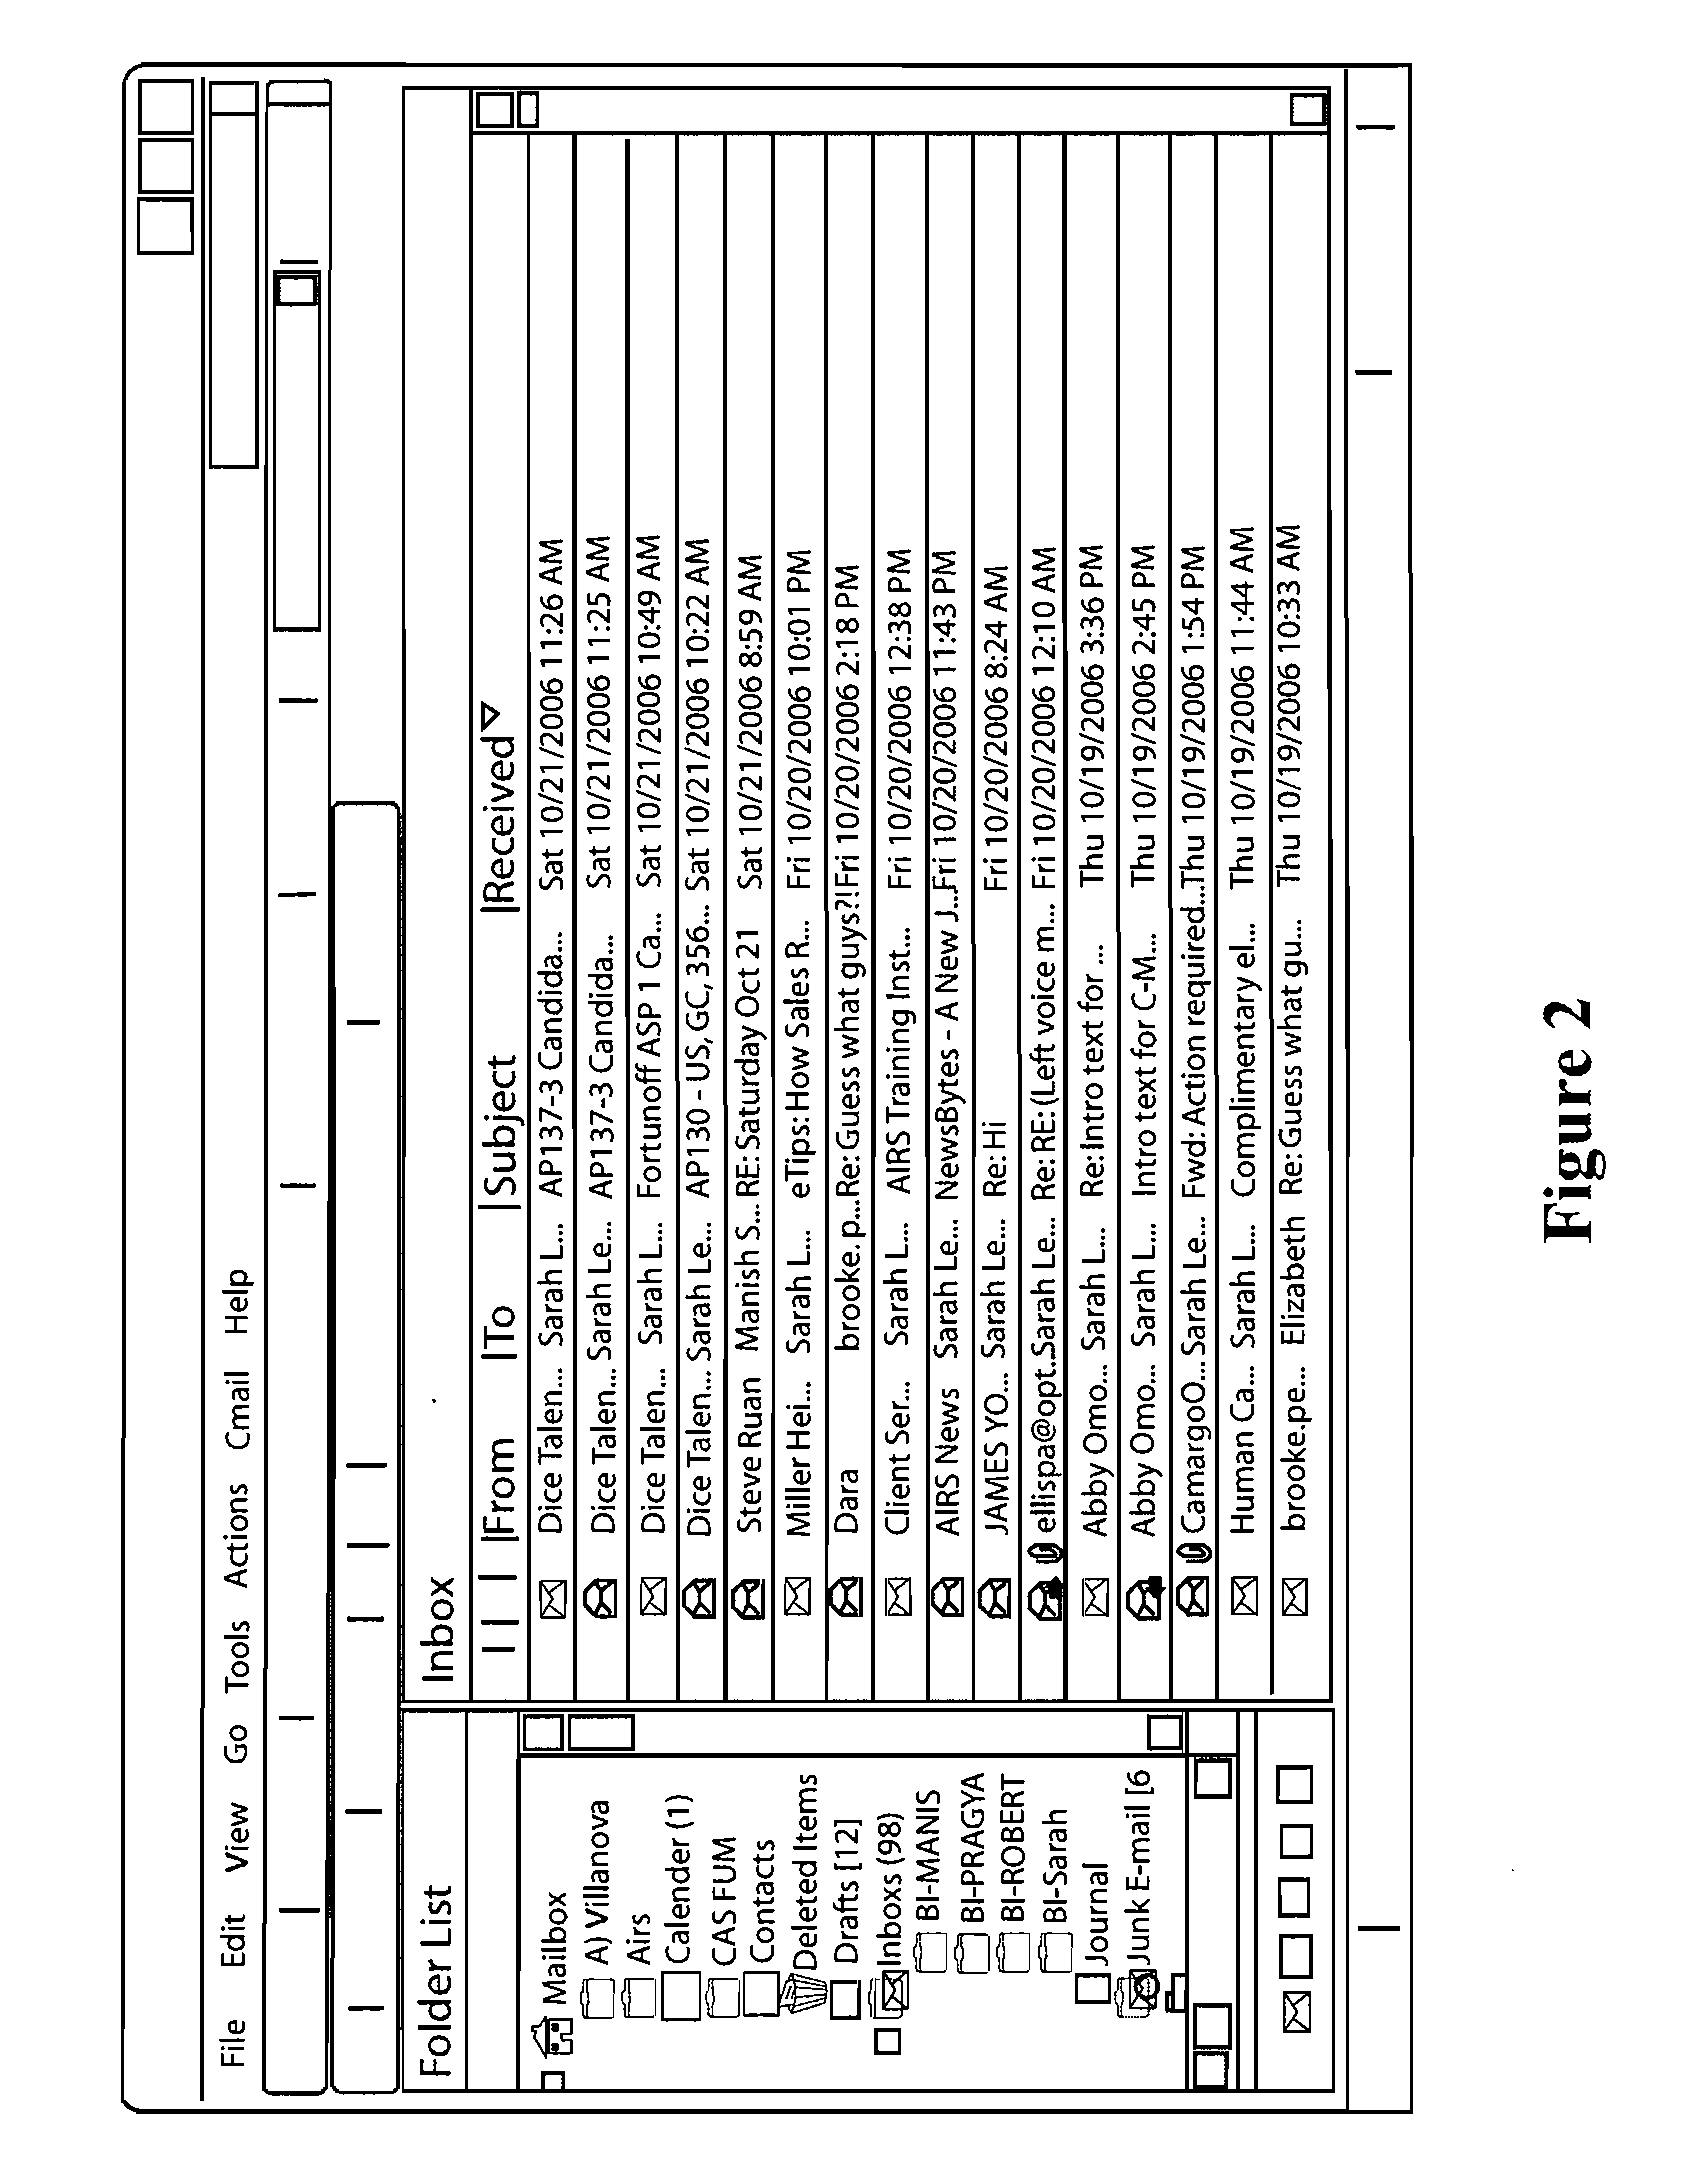 System and method of dynamically prioritized electronic mail graphical user interface, and measuring email productivity and collaboration trends